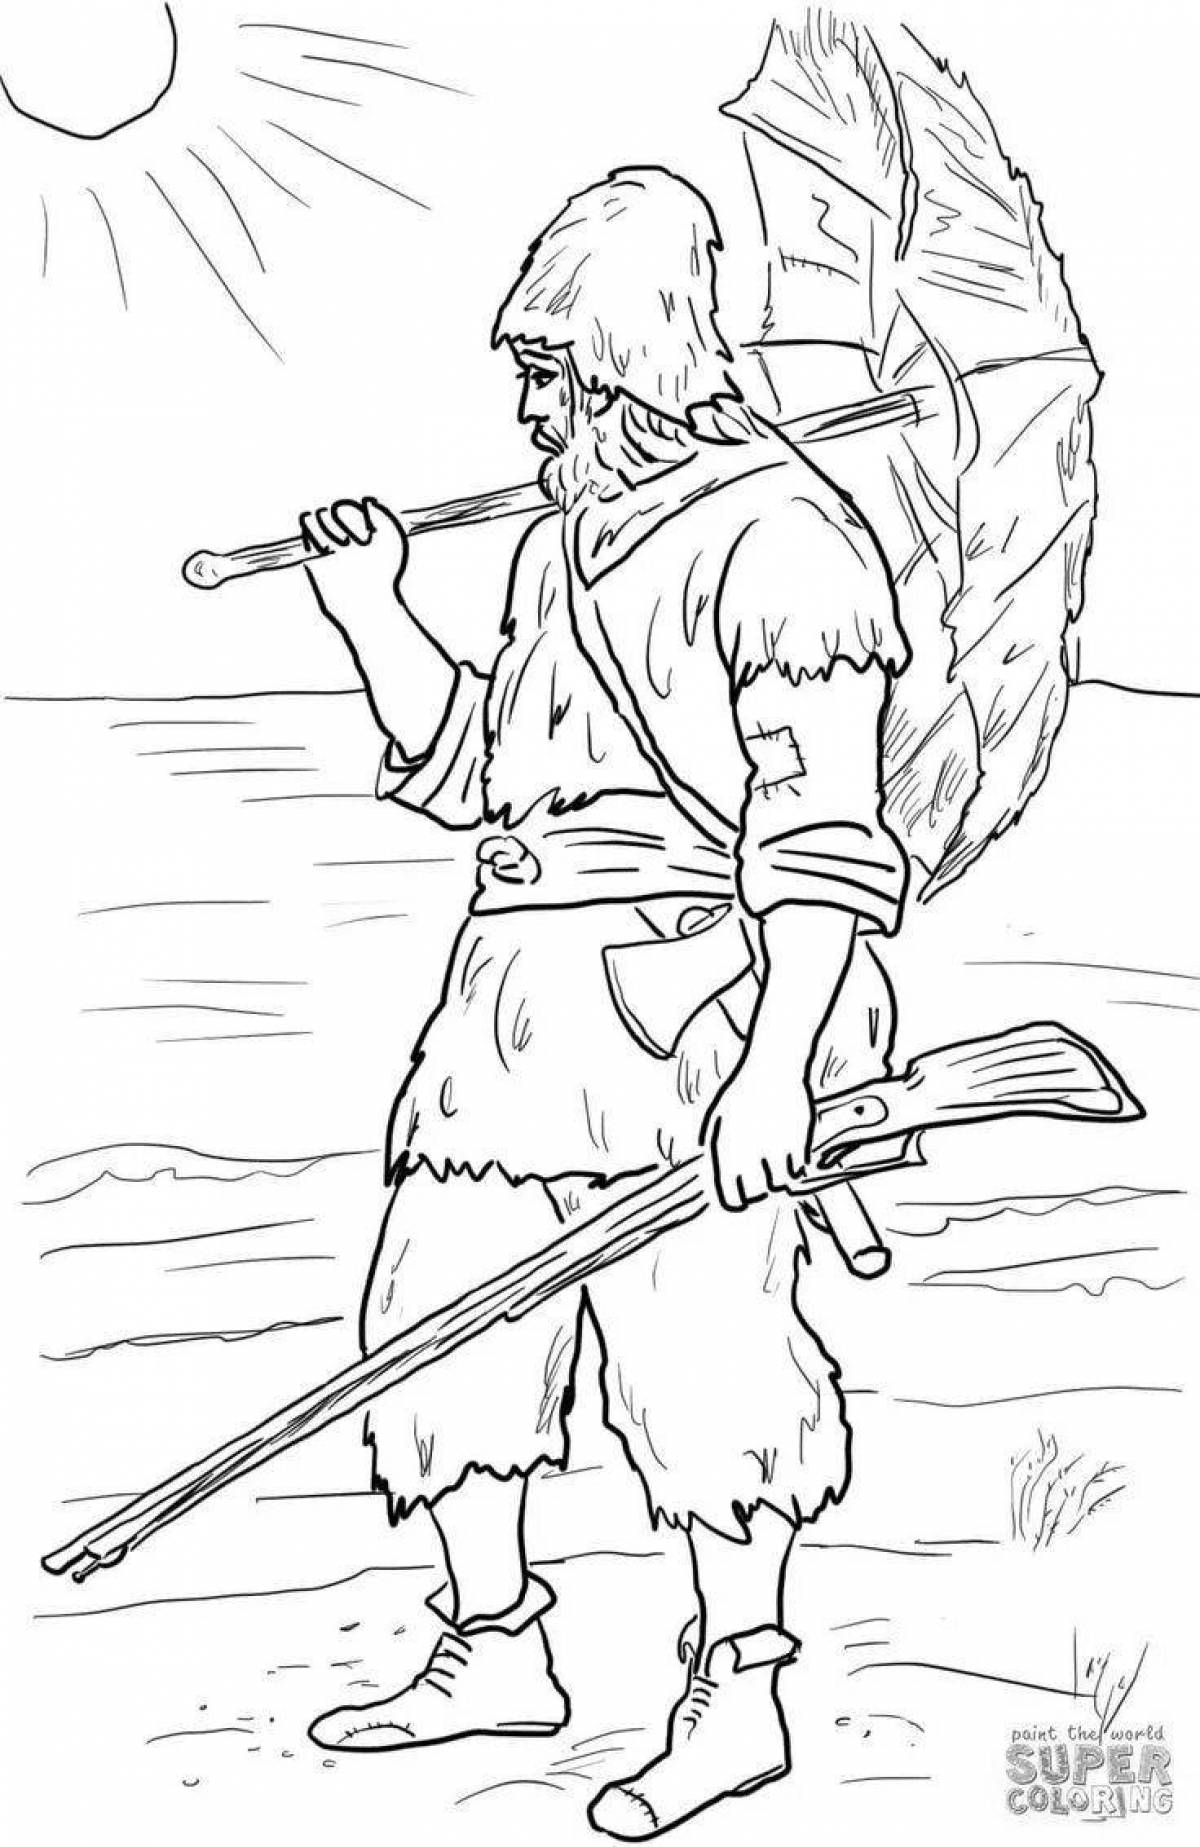 Coloring page robinson crusoe obsessed with flowers